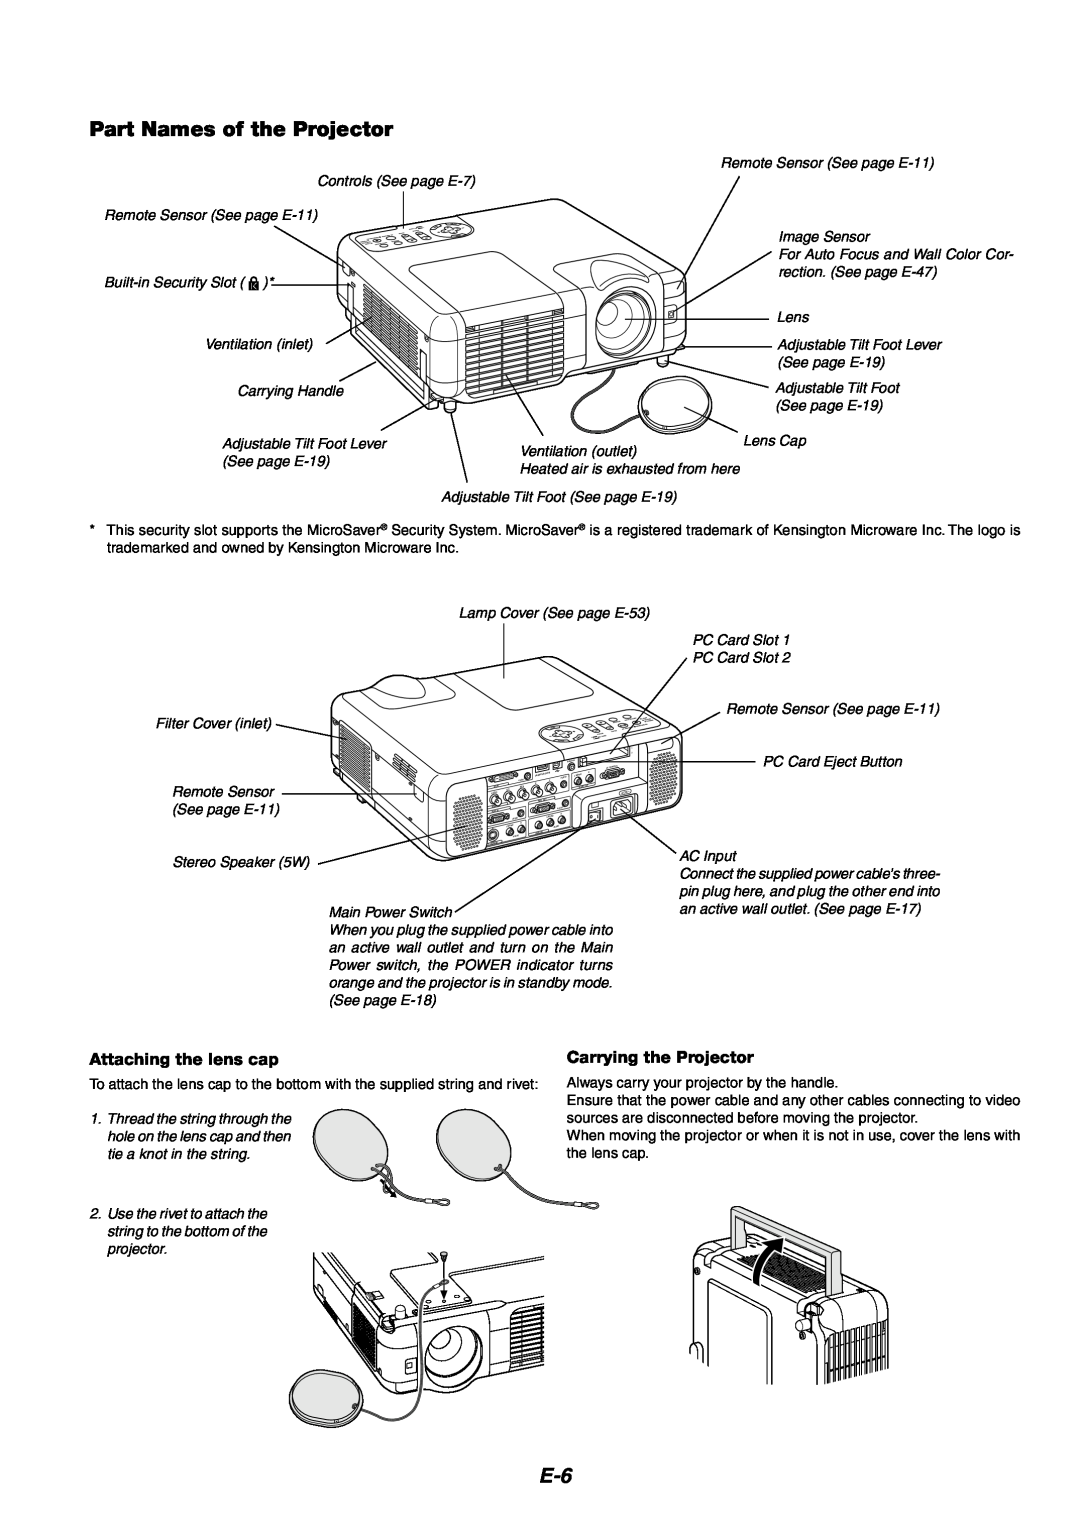 NEC MT1060 user manual Part Names of the Projector, Attaching the lens cap, Carrying the Projector 